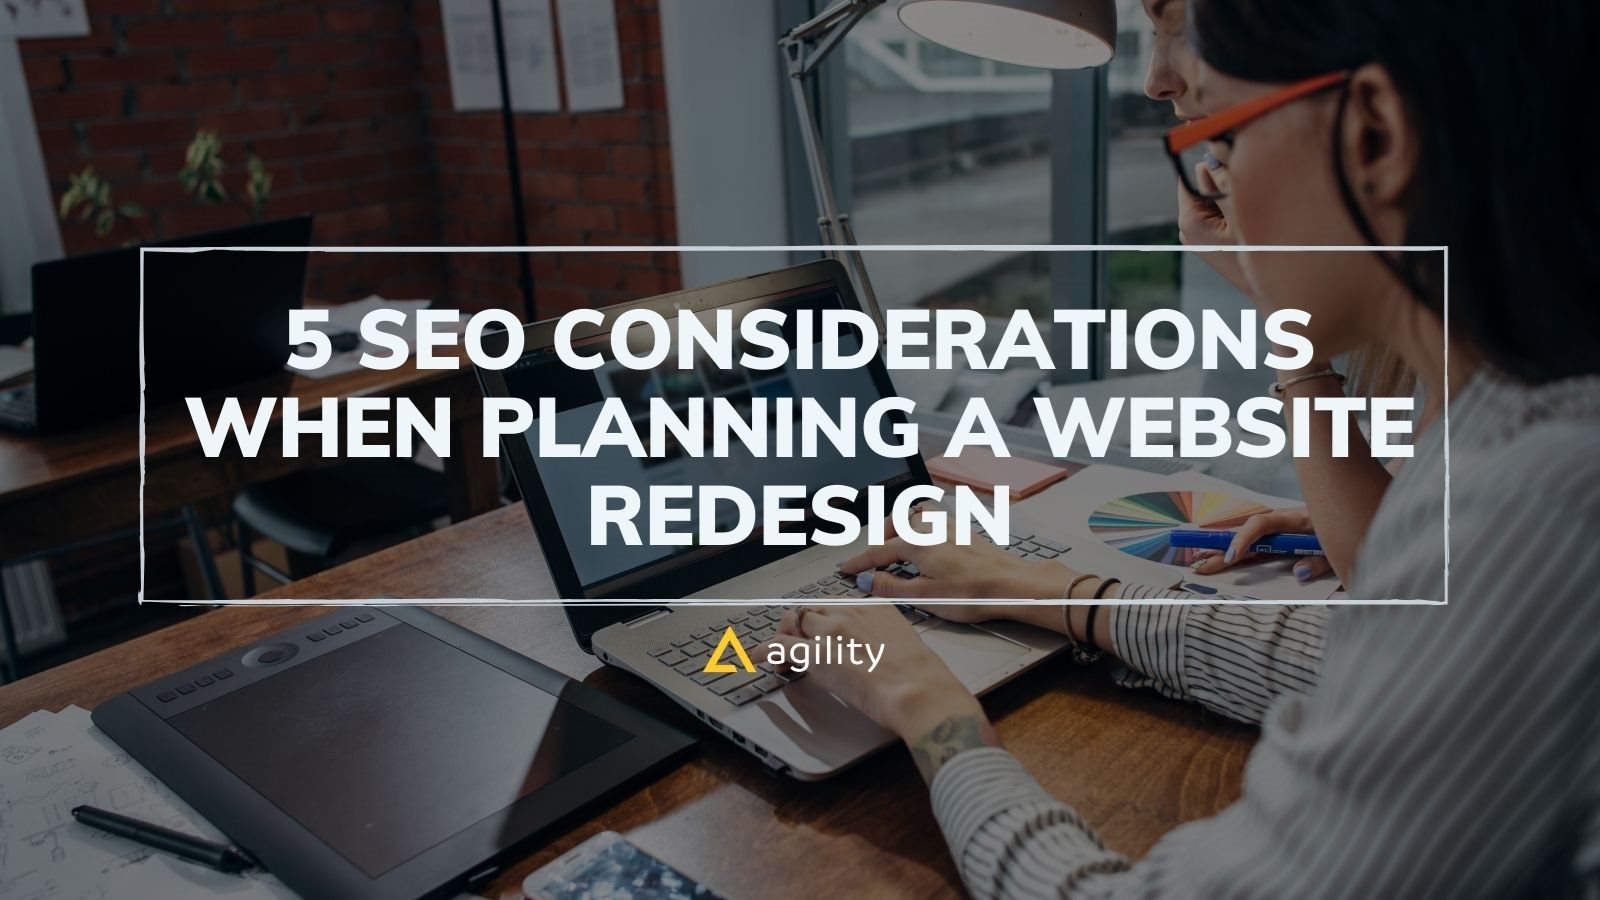 5 SEO Considerations When Planning a Website Redesign